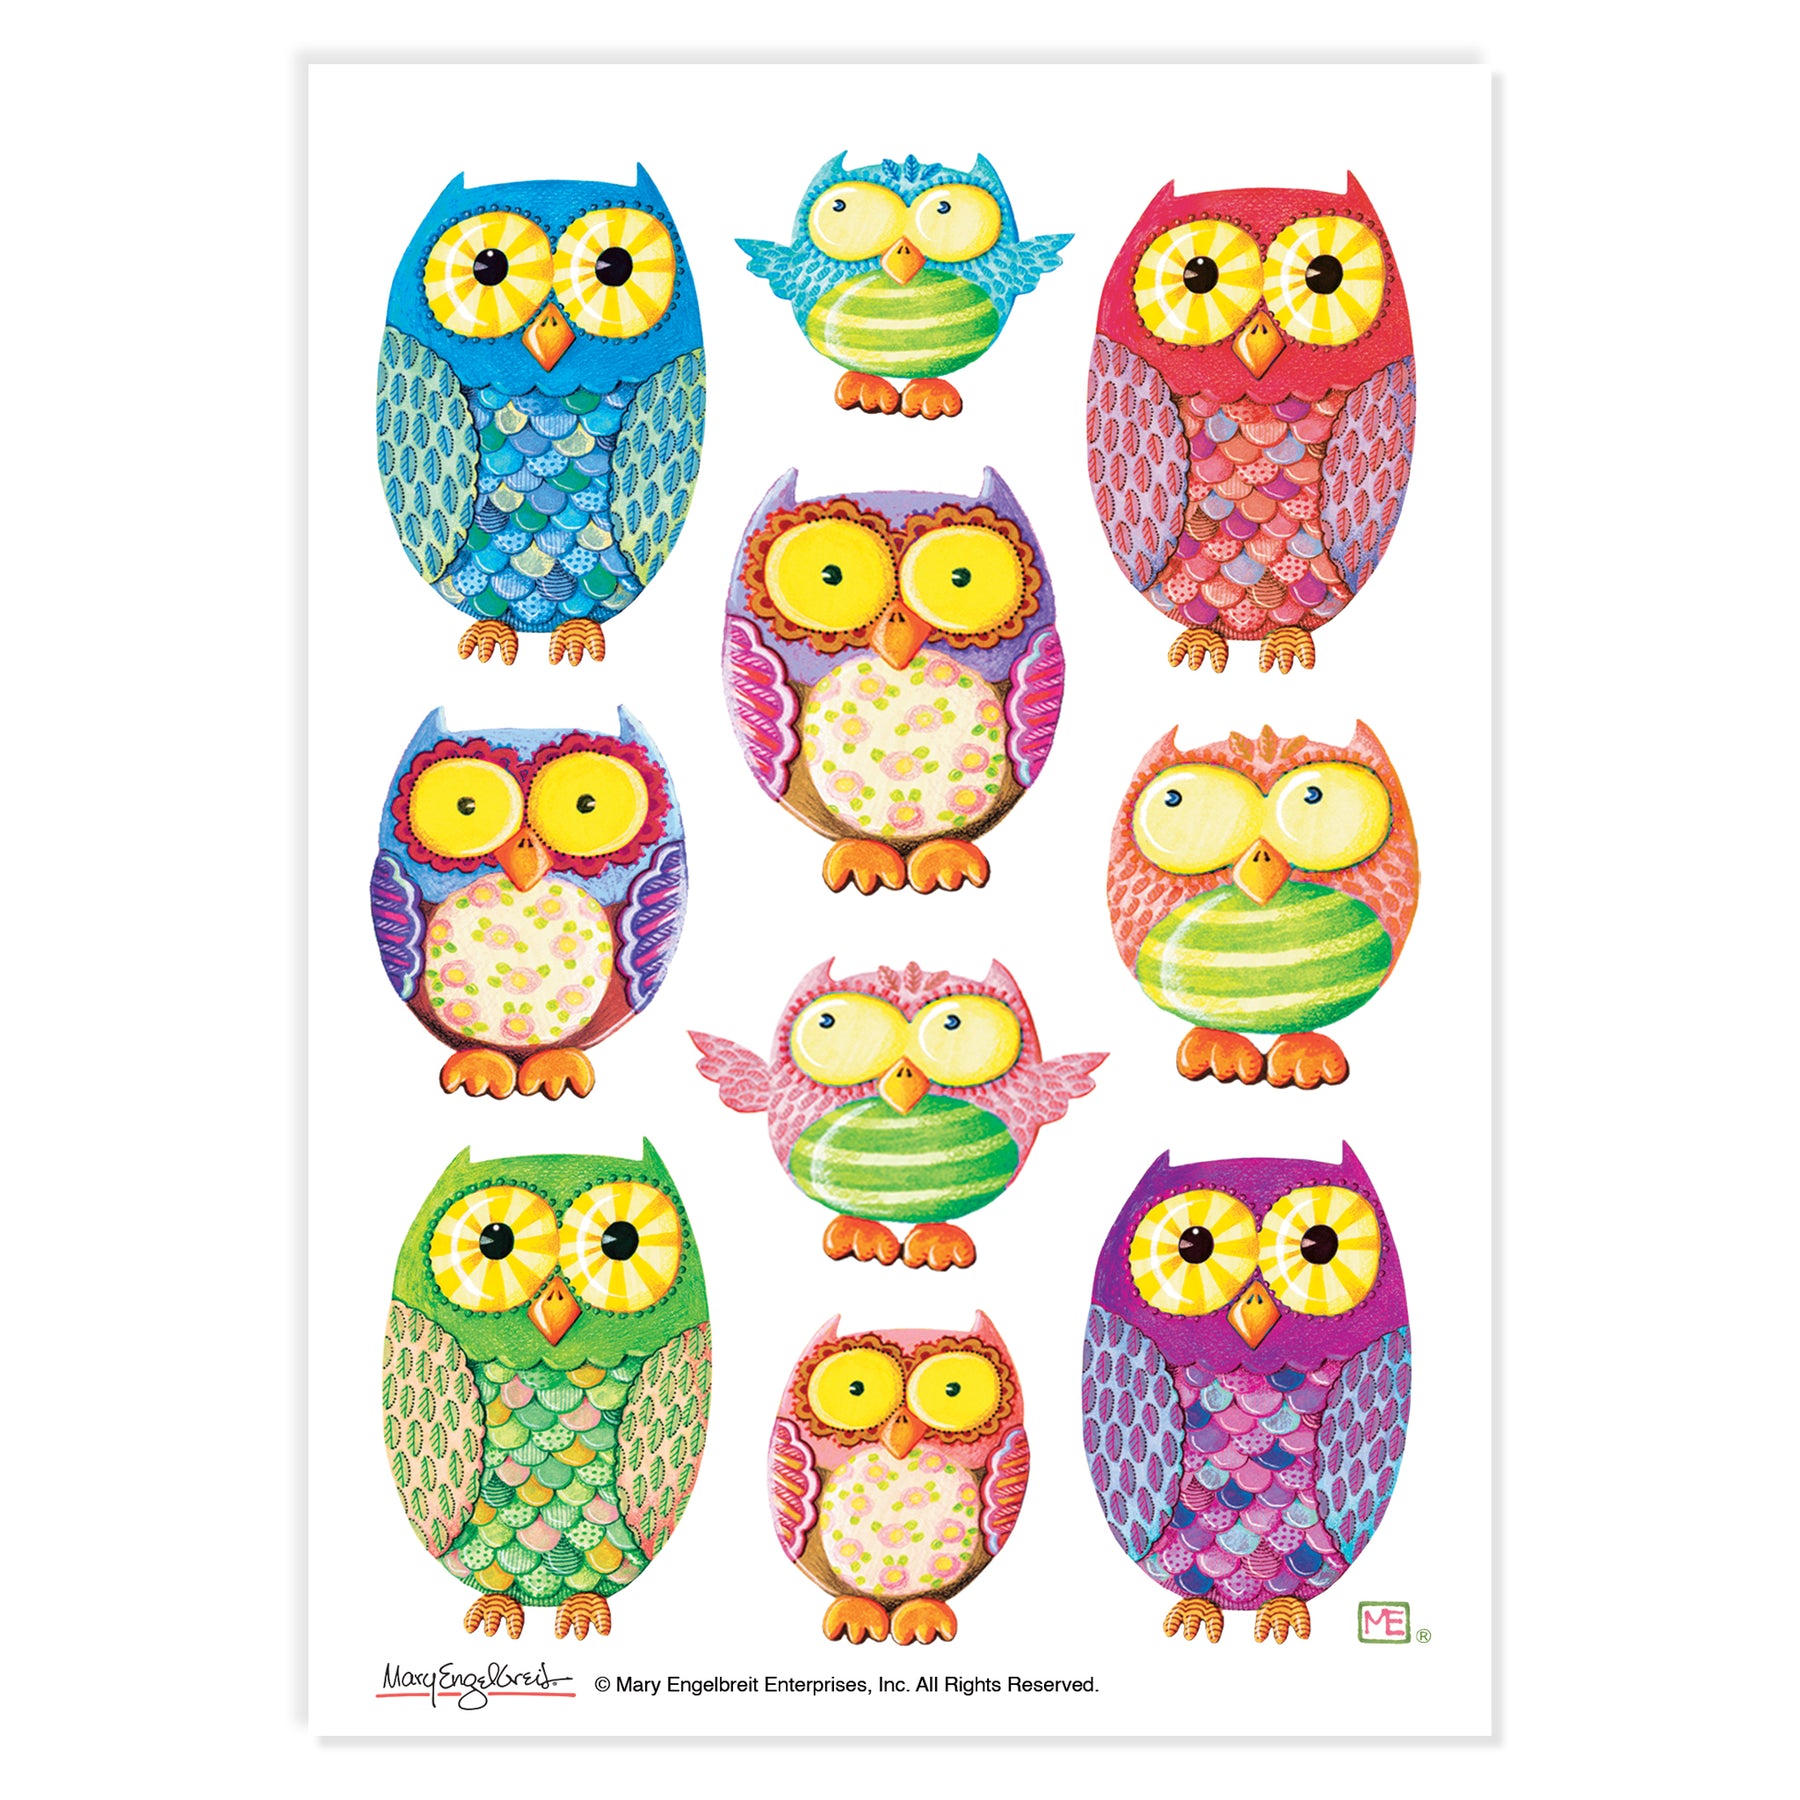 Colorful Owls Sticker Sheet